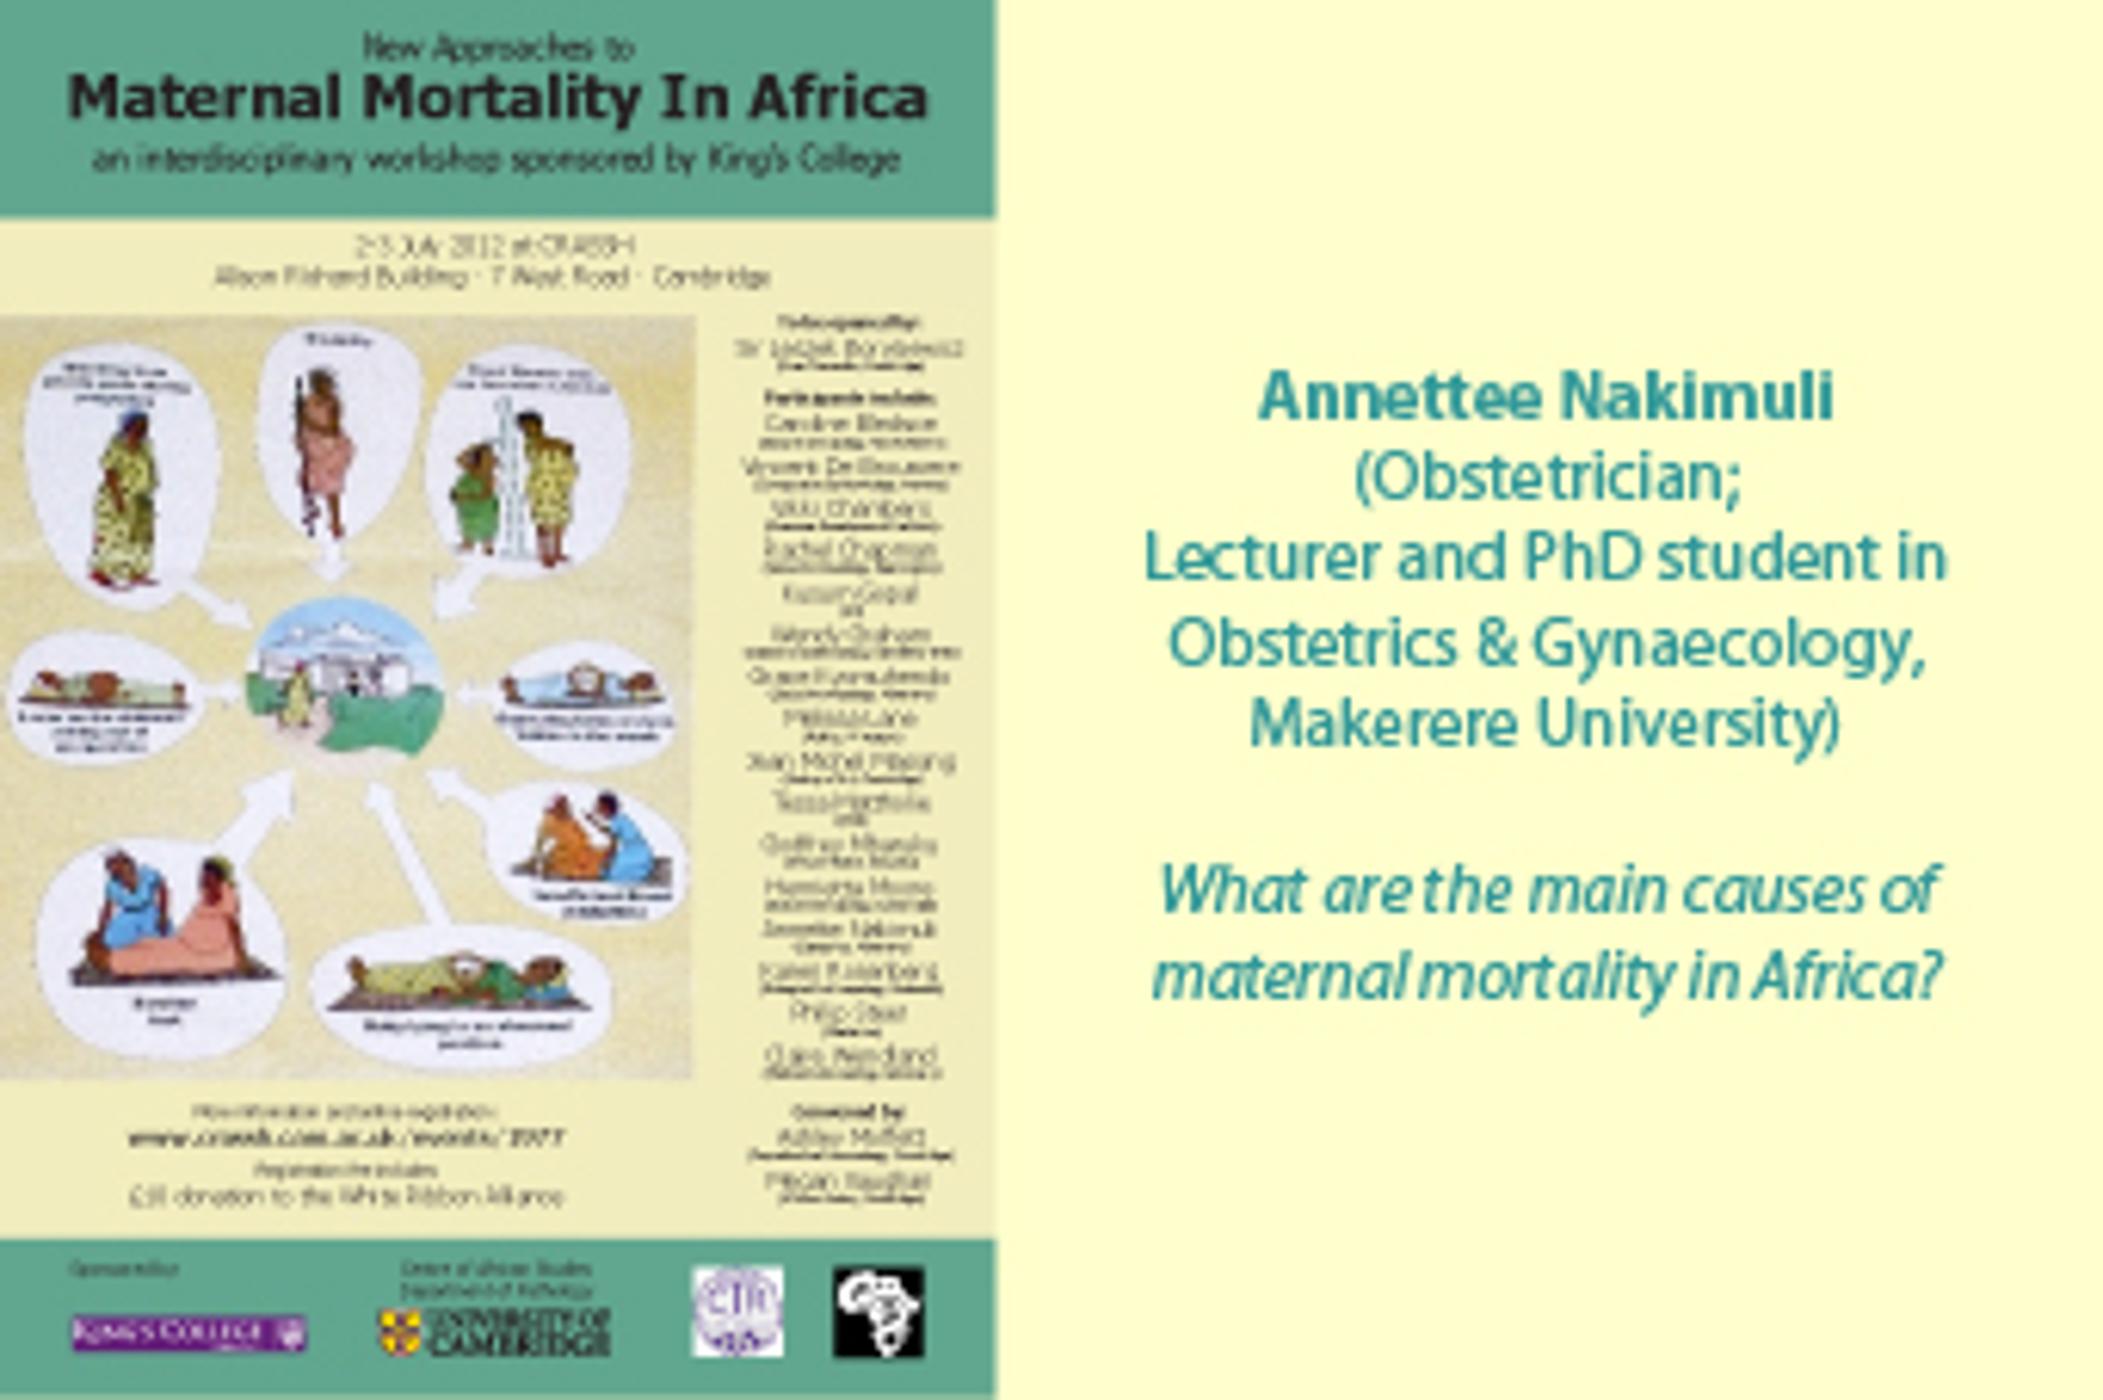 Annettee Nakimuli: New Approaches to Maternal Mortality In Africa